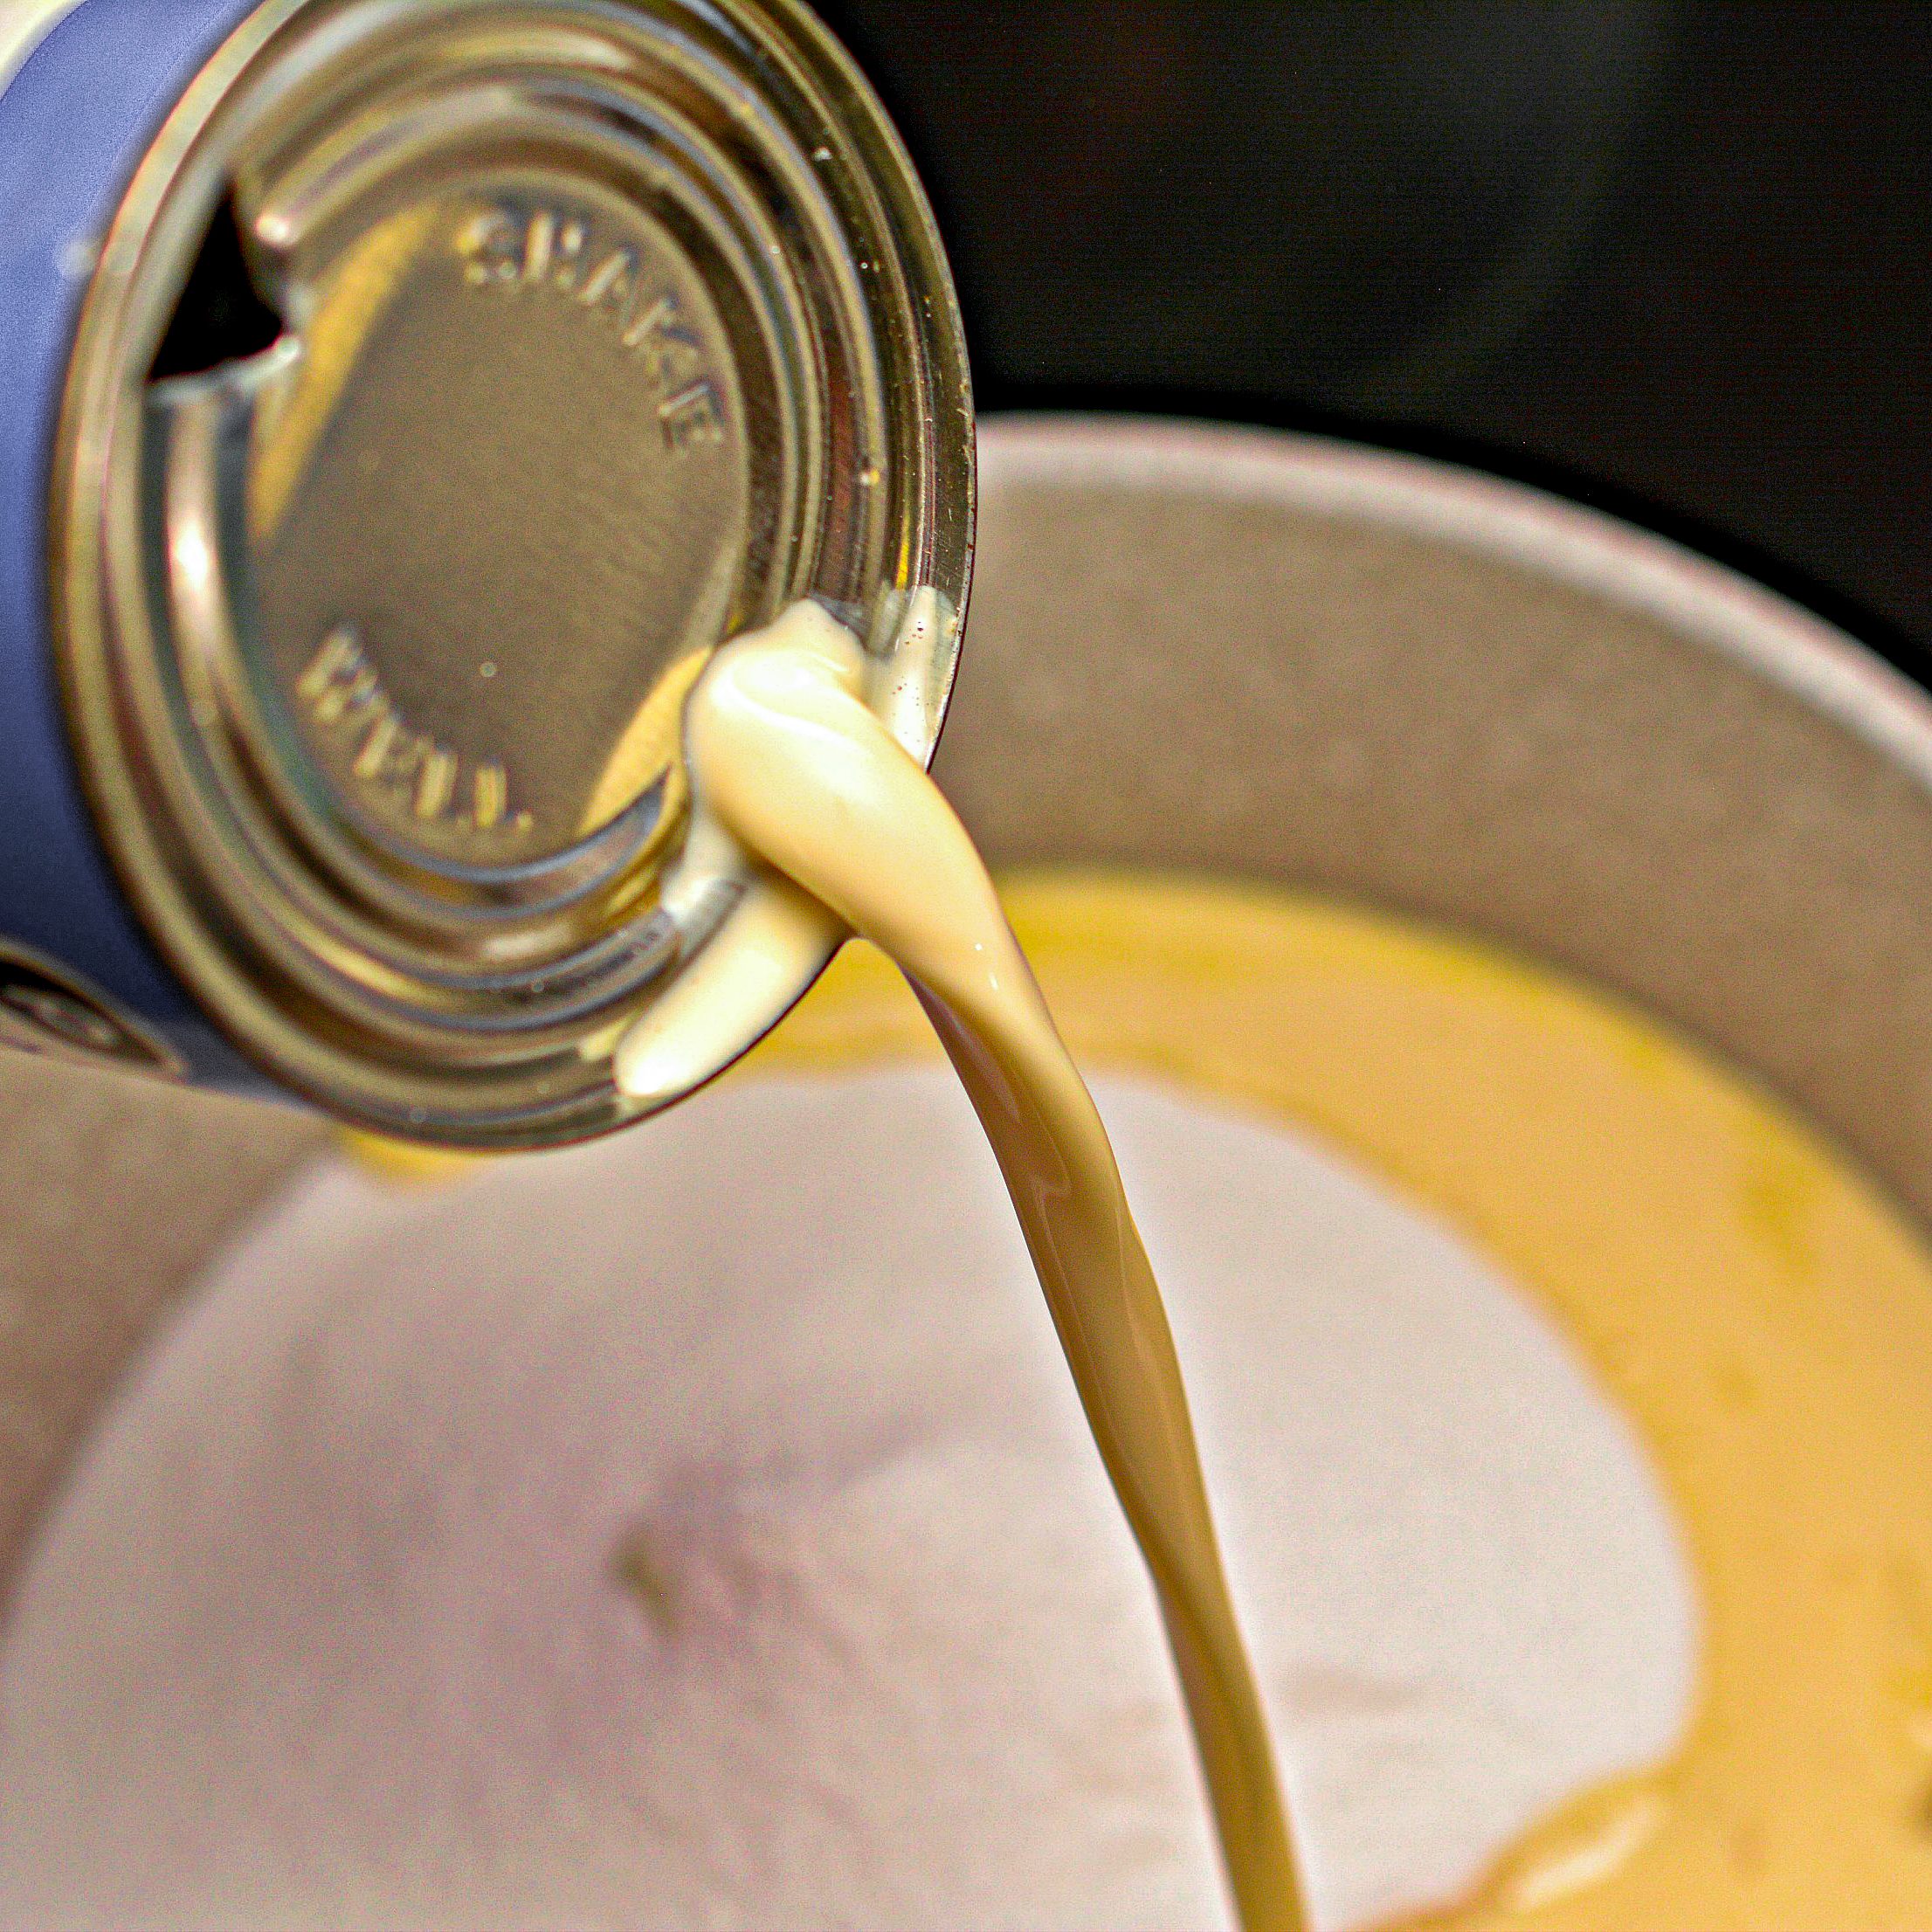 Add the butter, evaporated milk, and sugar to a saucepan over medium heat on the stove.